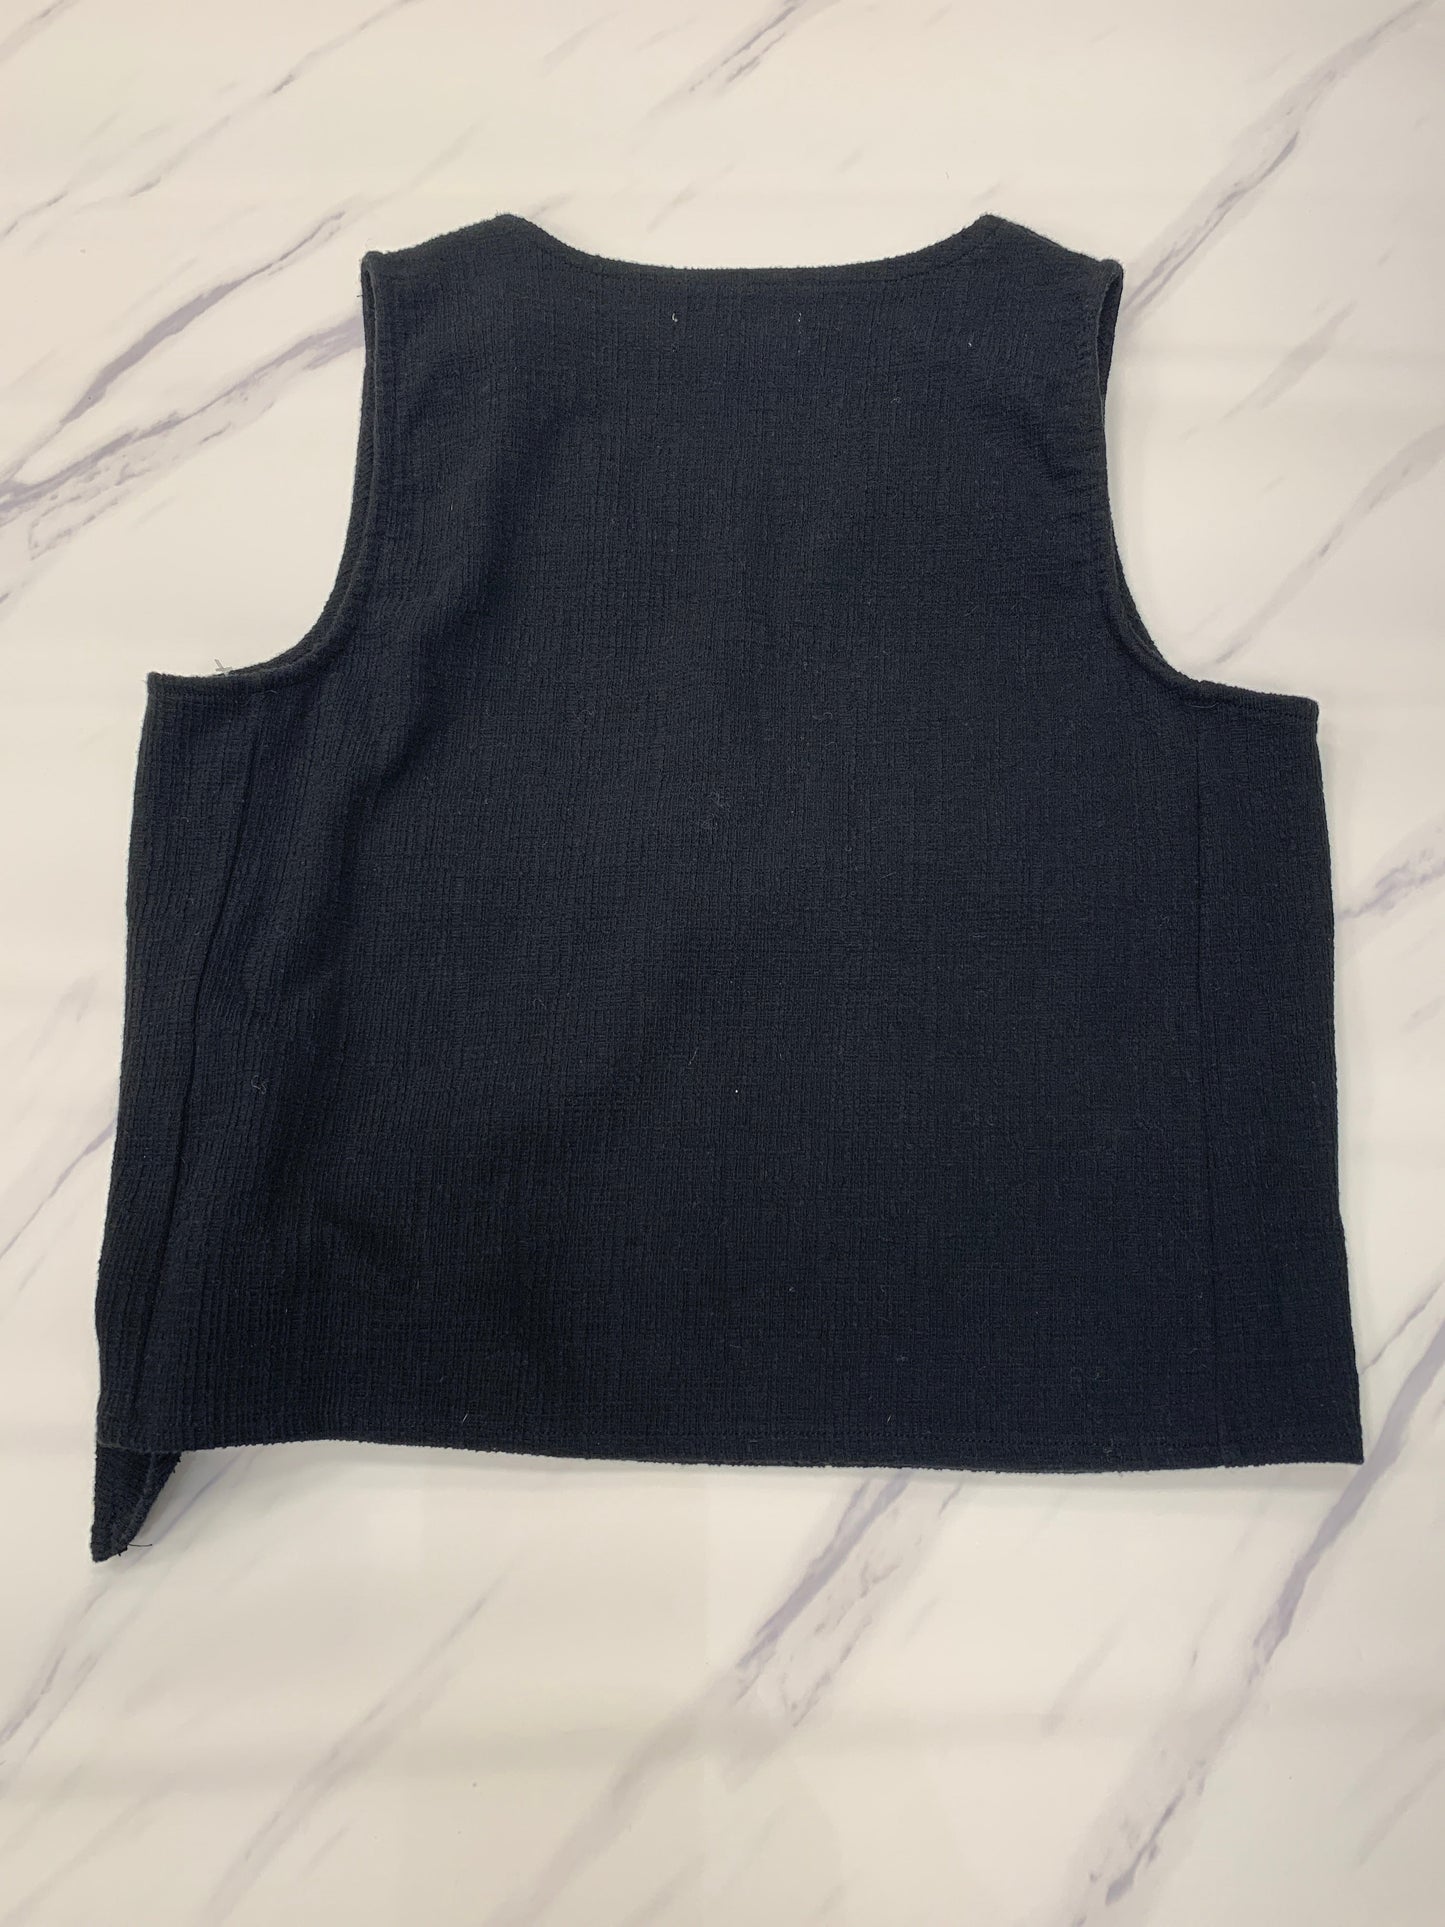 Top Sleeveless Designer By Madewell  Size: M